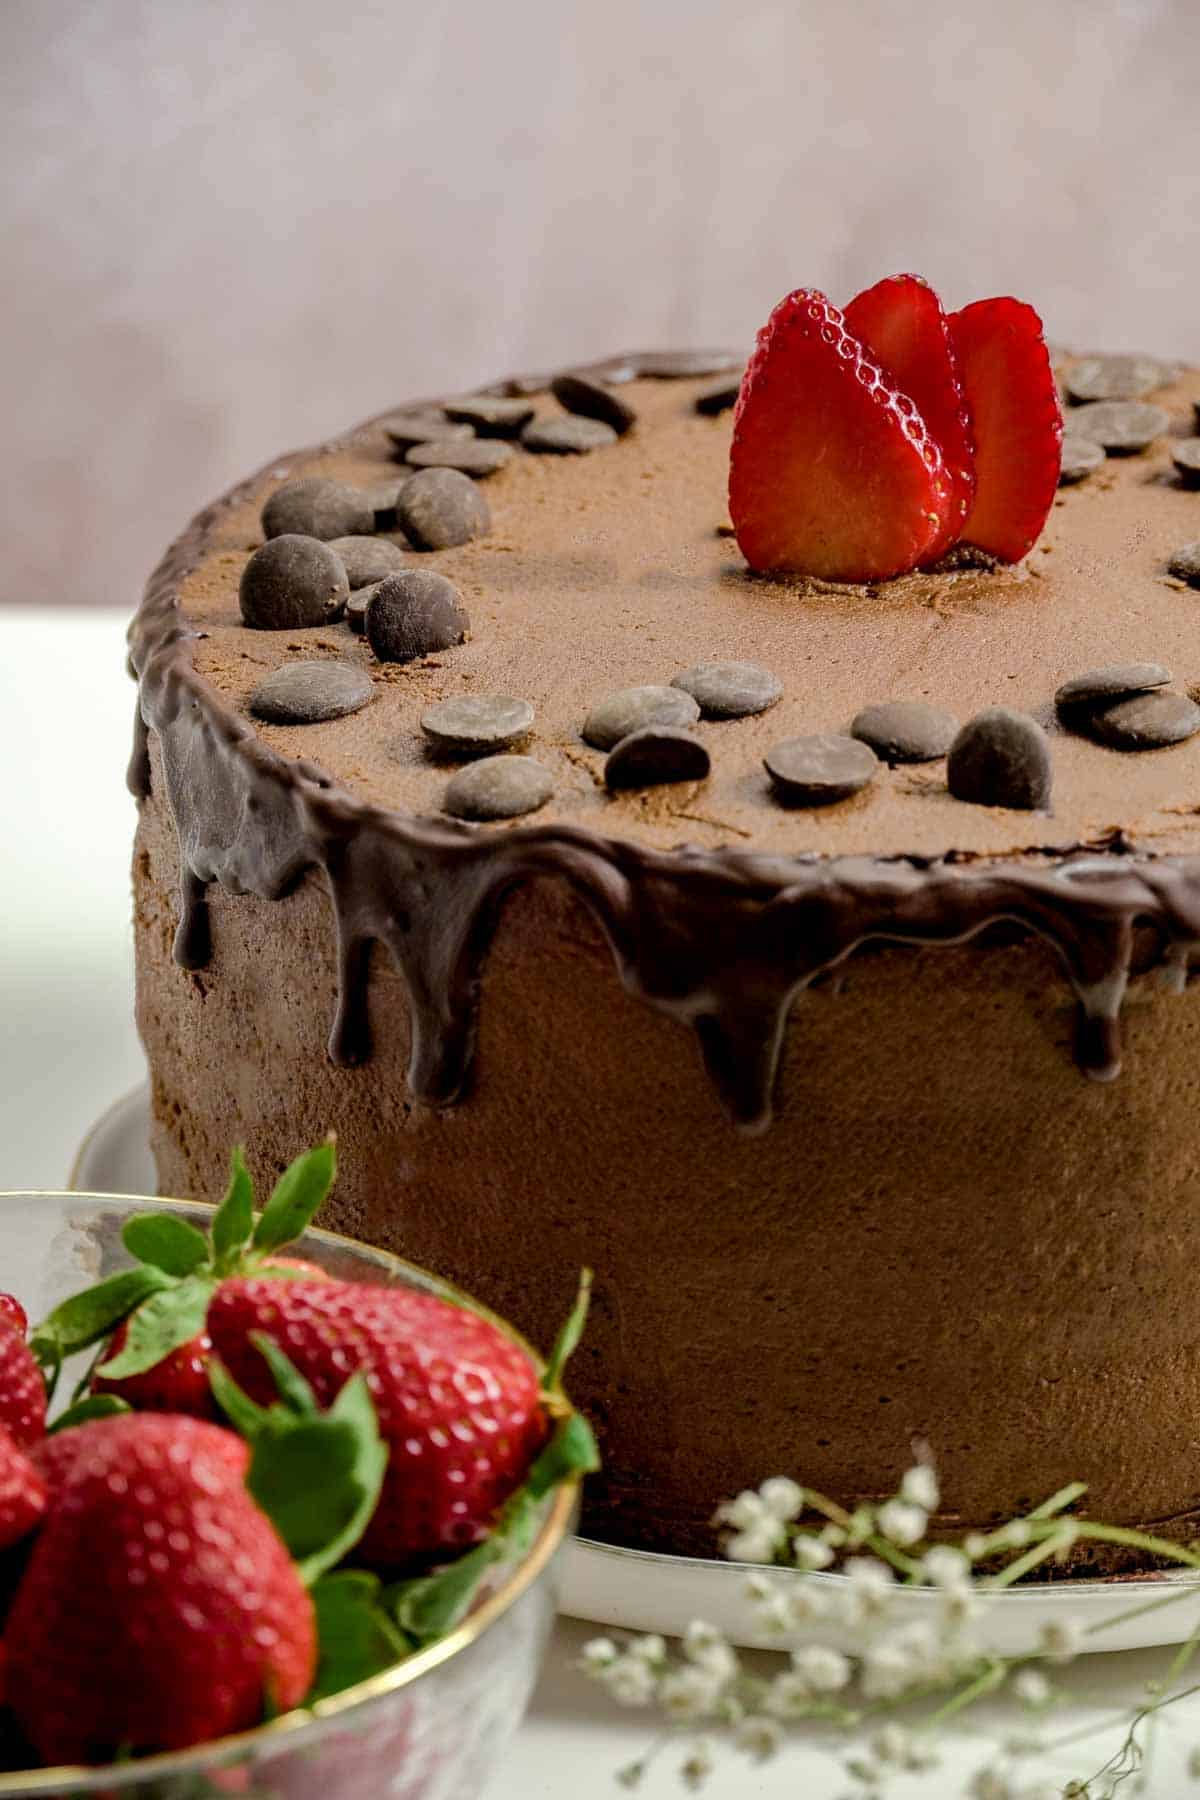 Chocolate Blackout cake decorated with sliced strawberries, chocolate ganache and chocolate chips on a white plate.